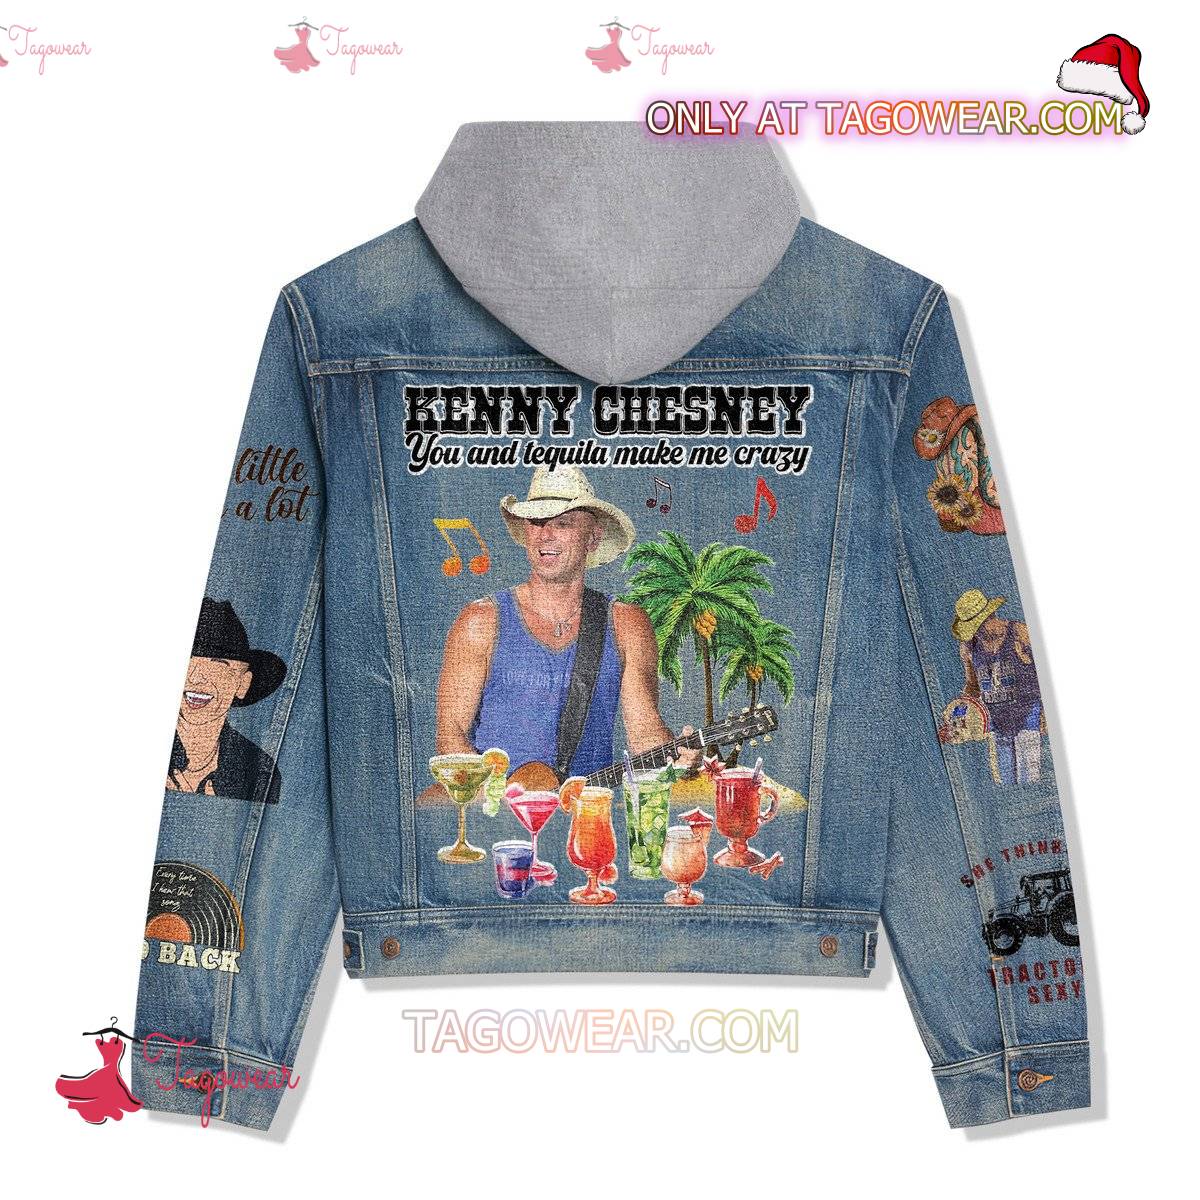 Kenny Chesney You And Tequila Make Me Crazy Jean Hoodie Jacket b